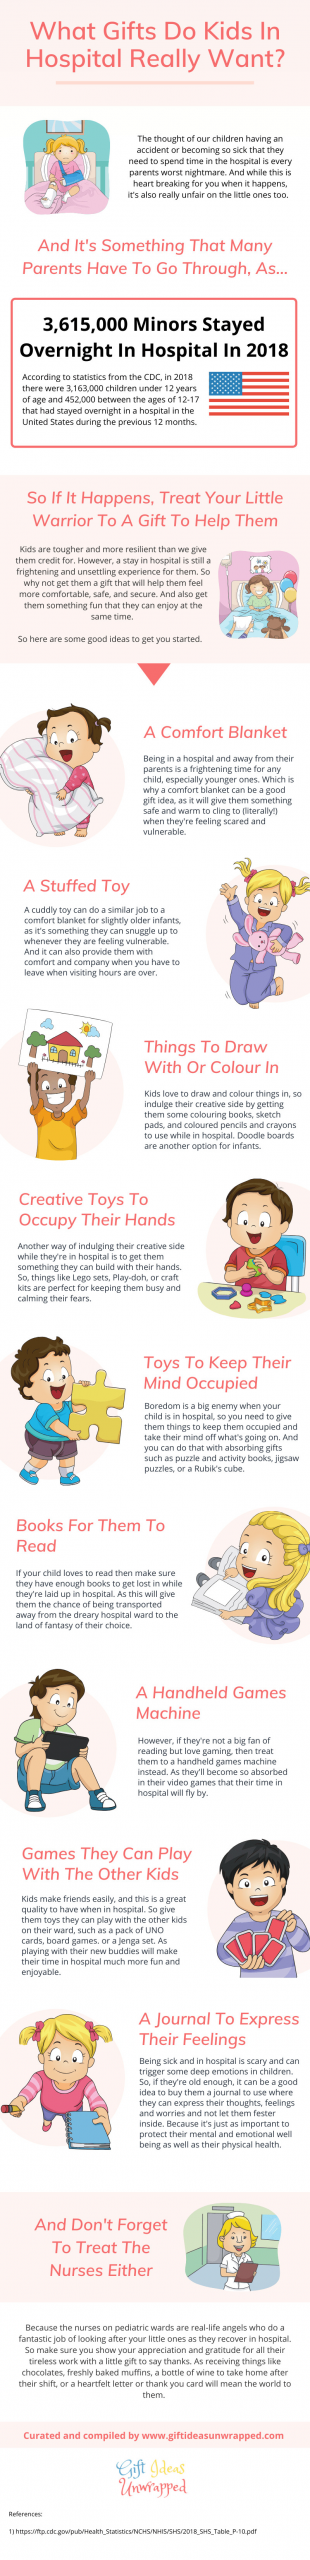 Gifts For Kids In Hospital
 10 Awesome And Uplifting Gift Ideas For Kids In Hospital